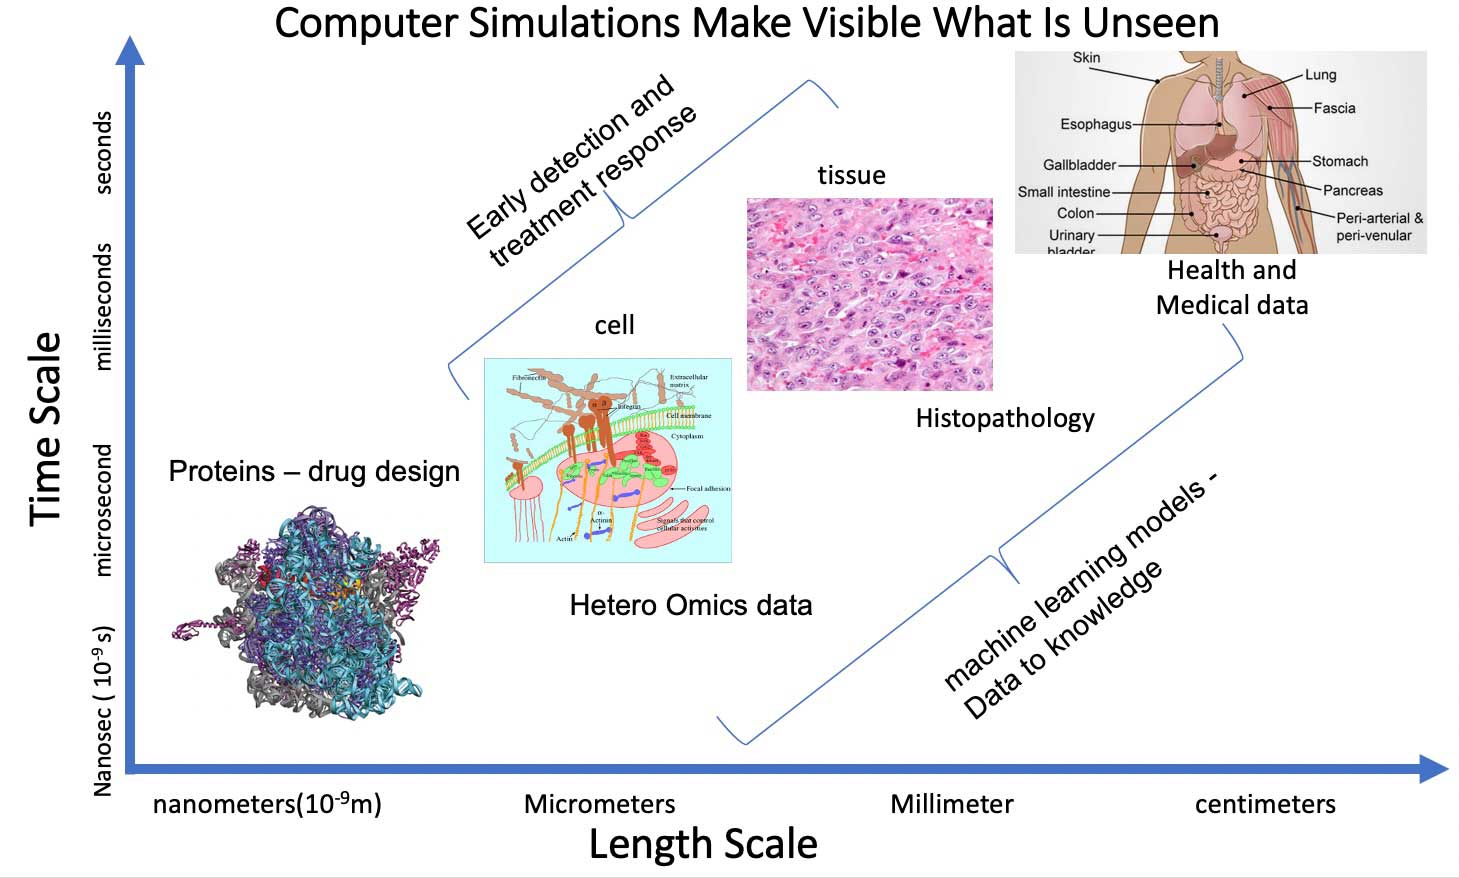 Computational and Quantitative Medicine Computer Simulations Make Visible What is Unseen